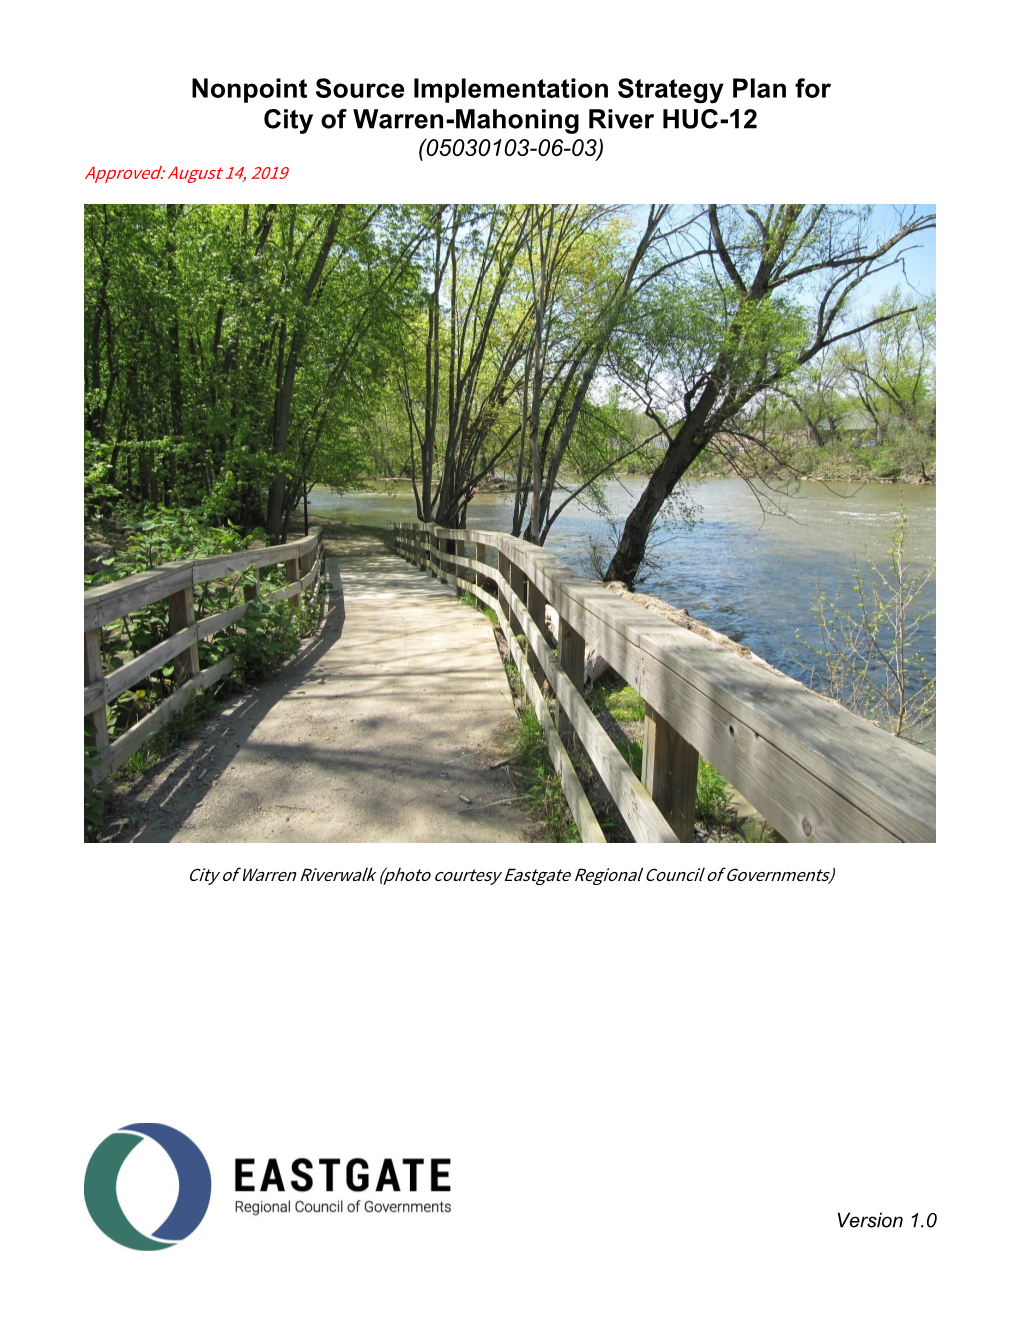 Nonpoint Source Implementation Strategy Plan for City of Warren-Mahoning River HUC-12 (05030103-06-03) Approved: August 14, 2019